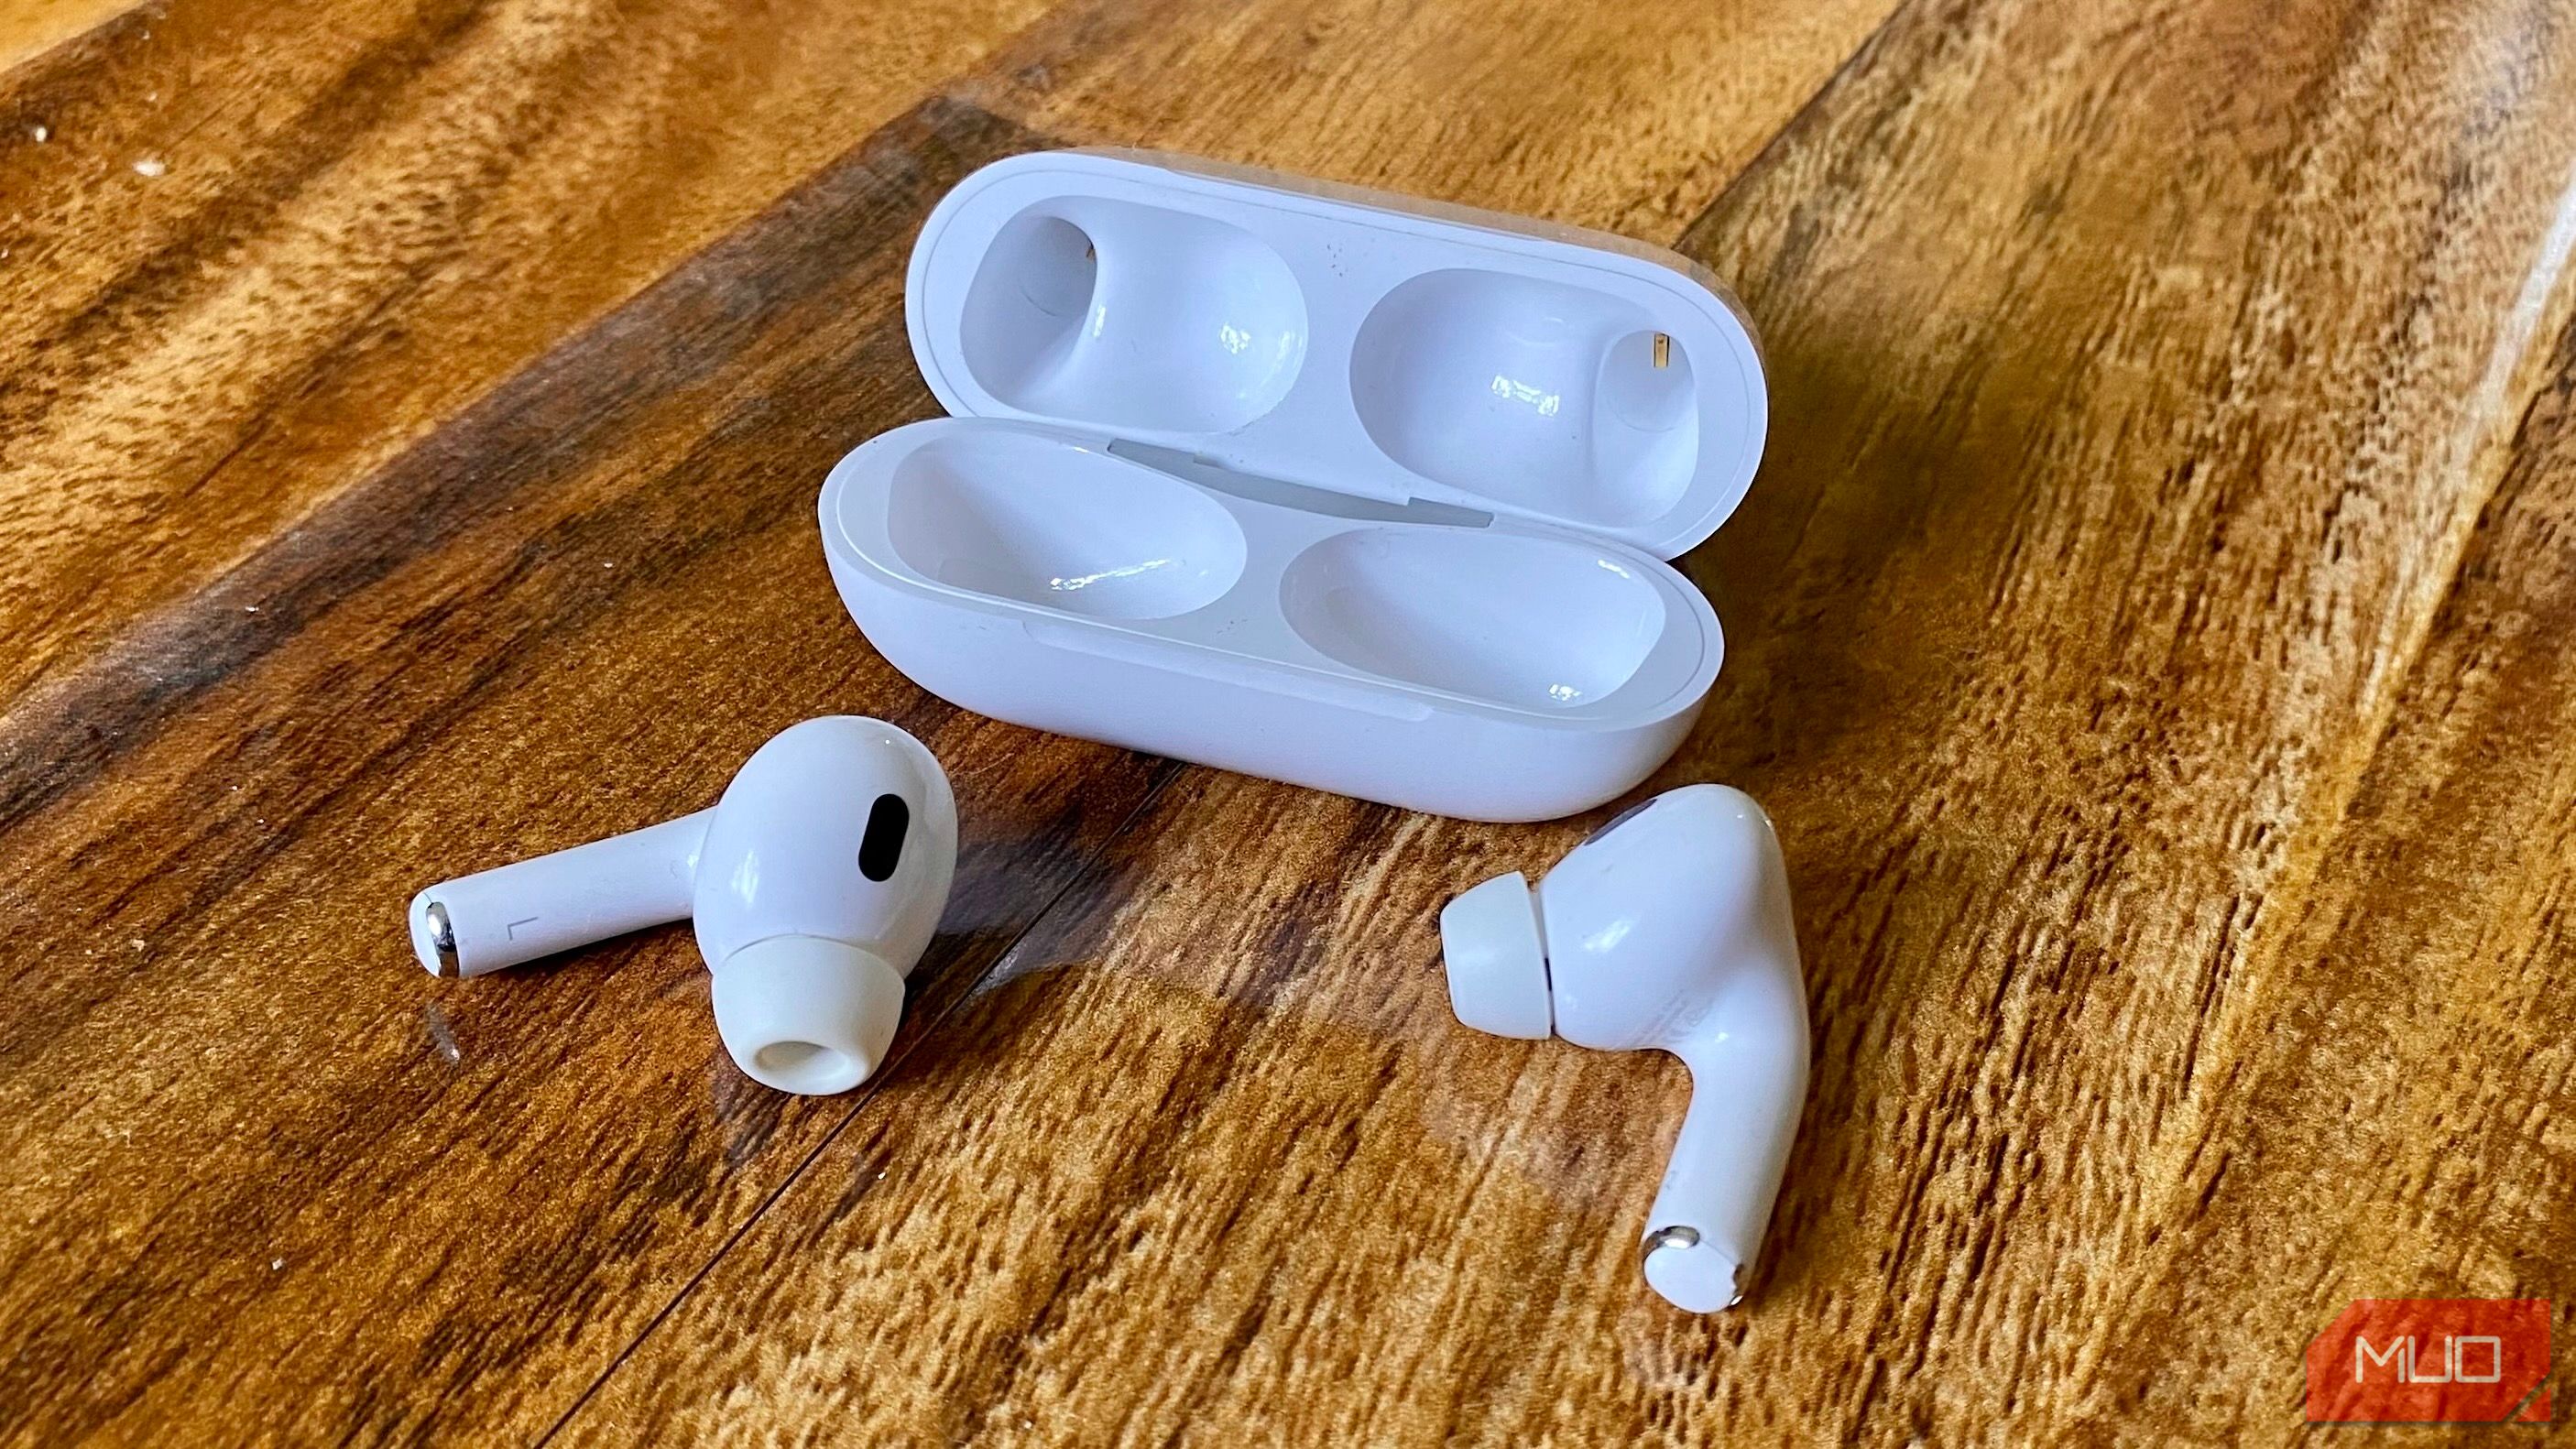 image of airpods on wooden table